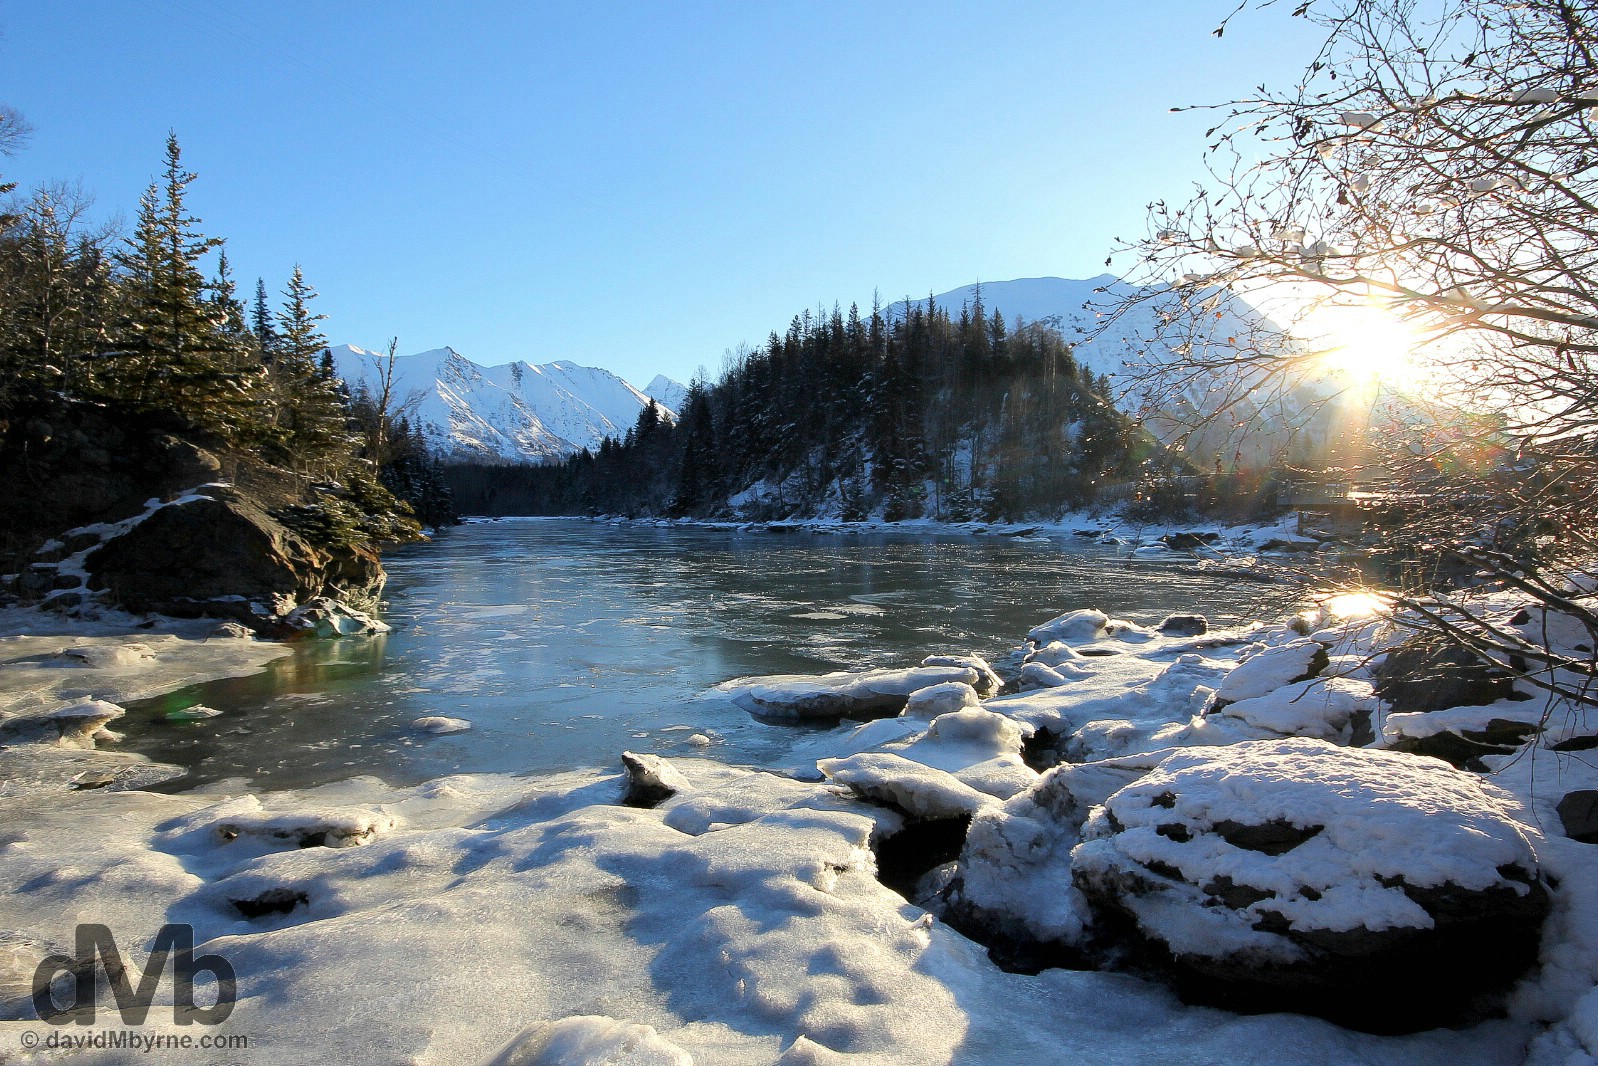 The first rays of the day in Bird Creek off the Seward Highway, Alaska, USA. March 12, 2013.